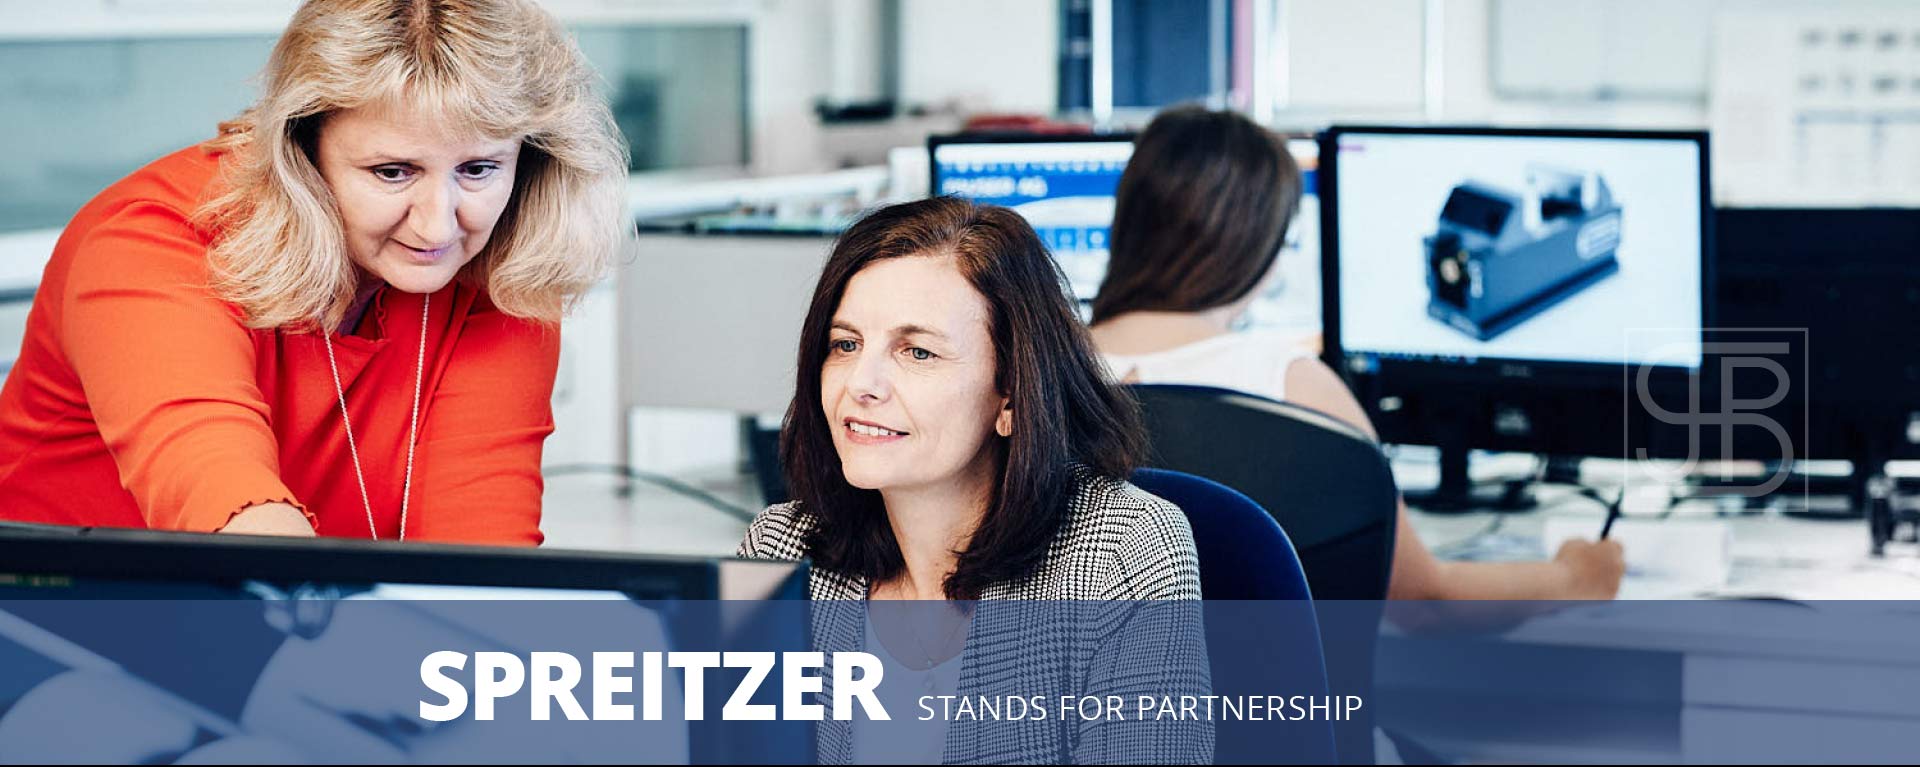 Spreitzer stands for partnership